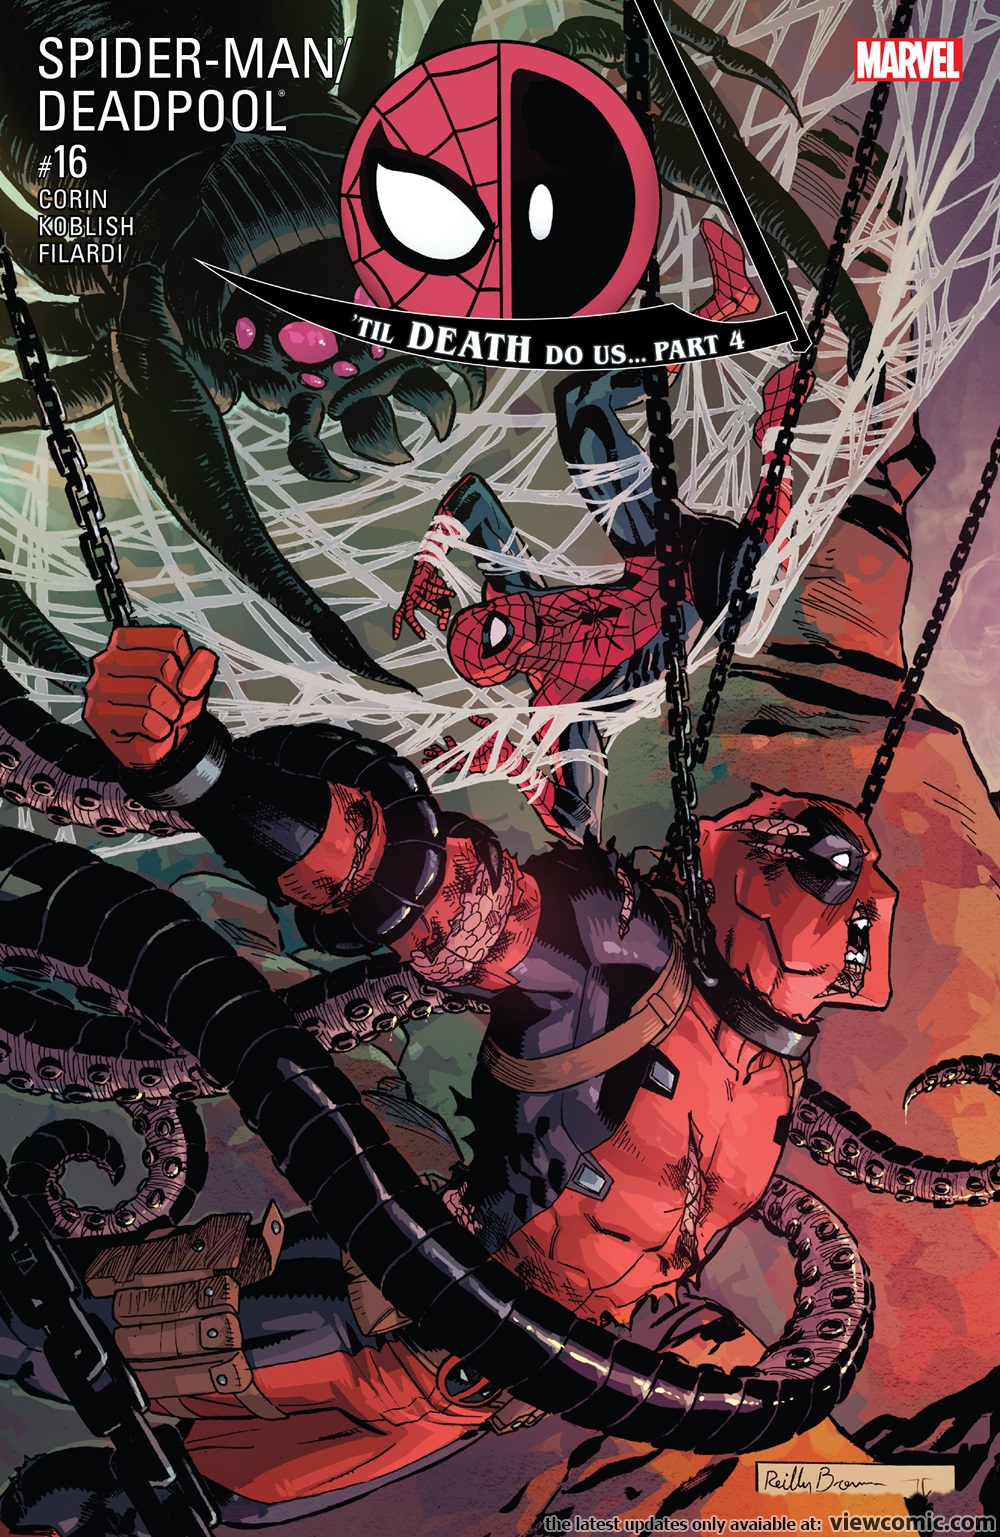 Justice League Gay Porn Deadpool - Spider Man Deadpool 016 2017 | Read Spider Man Deadpool 016 2017 comic  online in high quality. Read Full Comic online for free - Read comics  online in high quality .